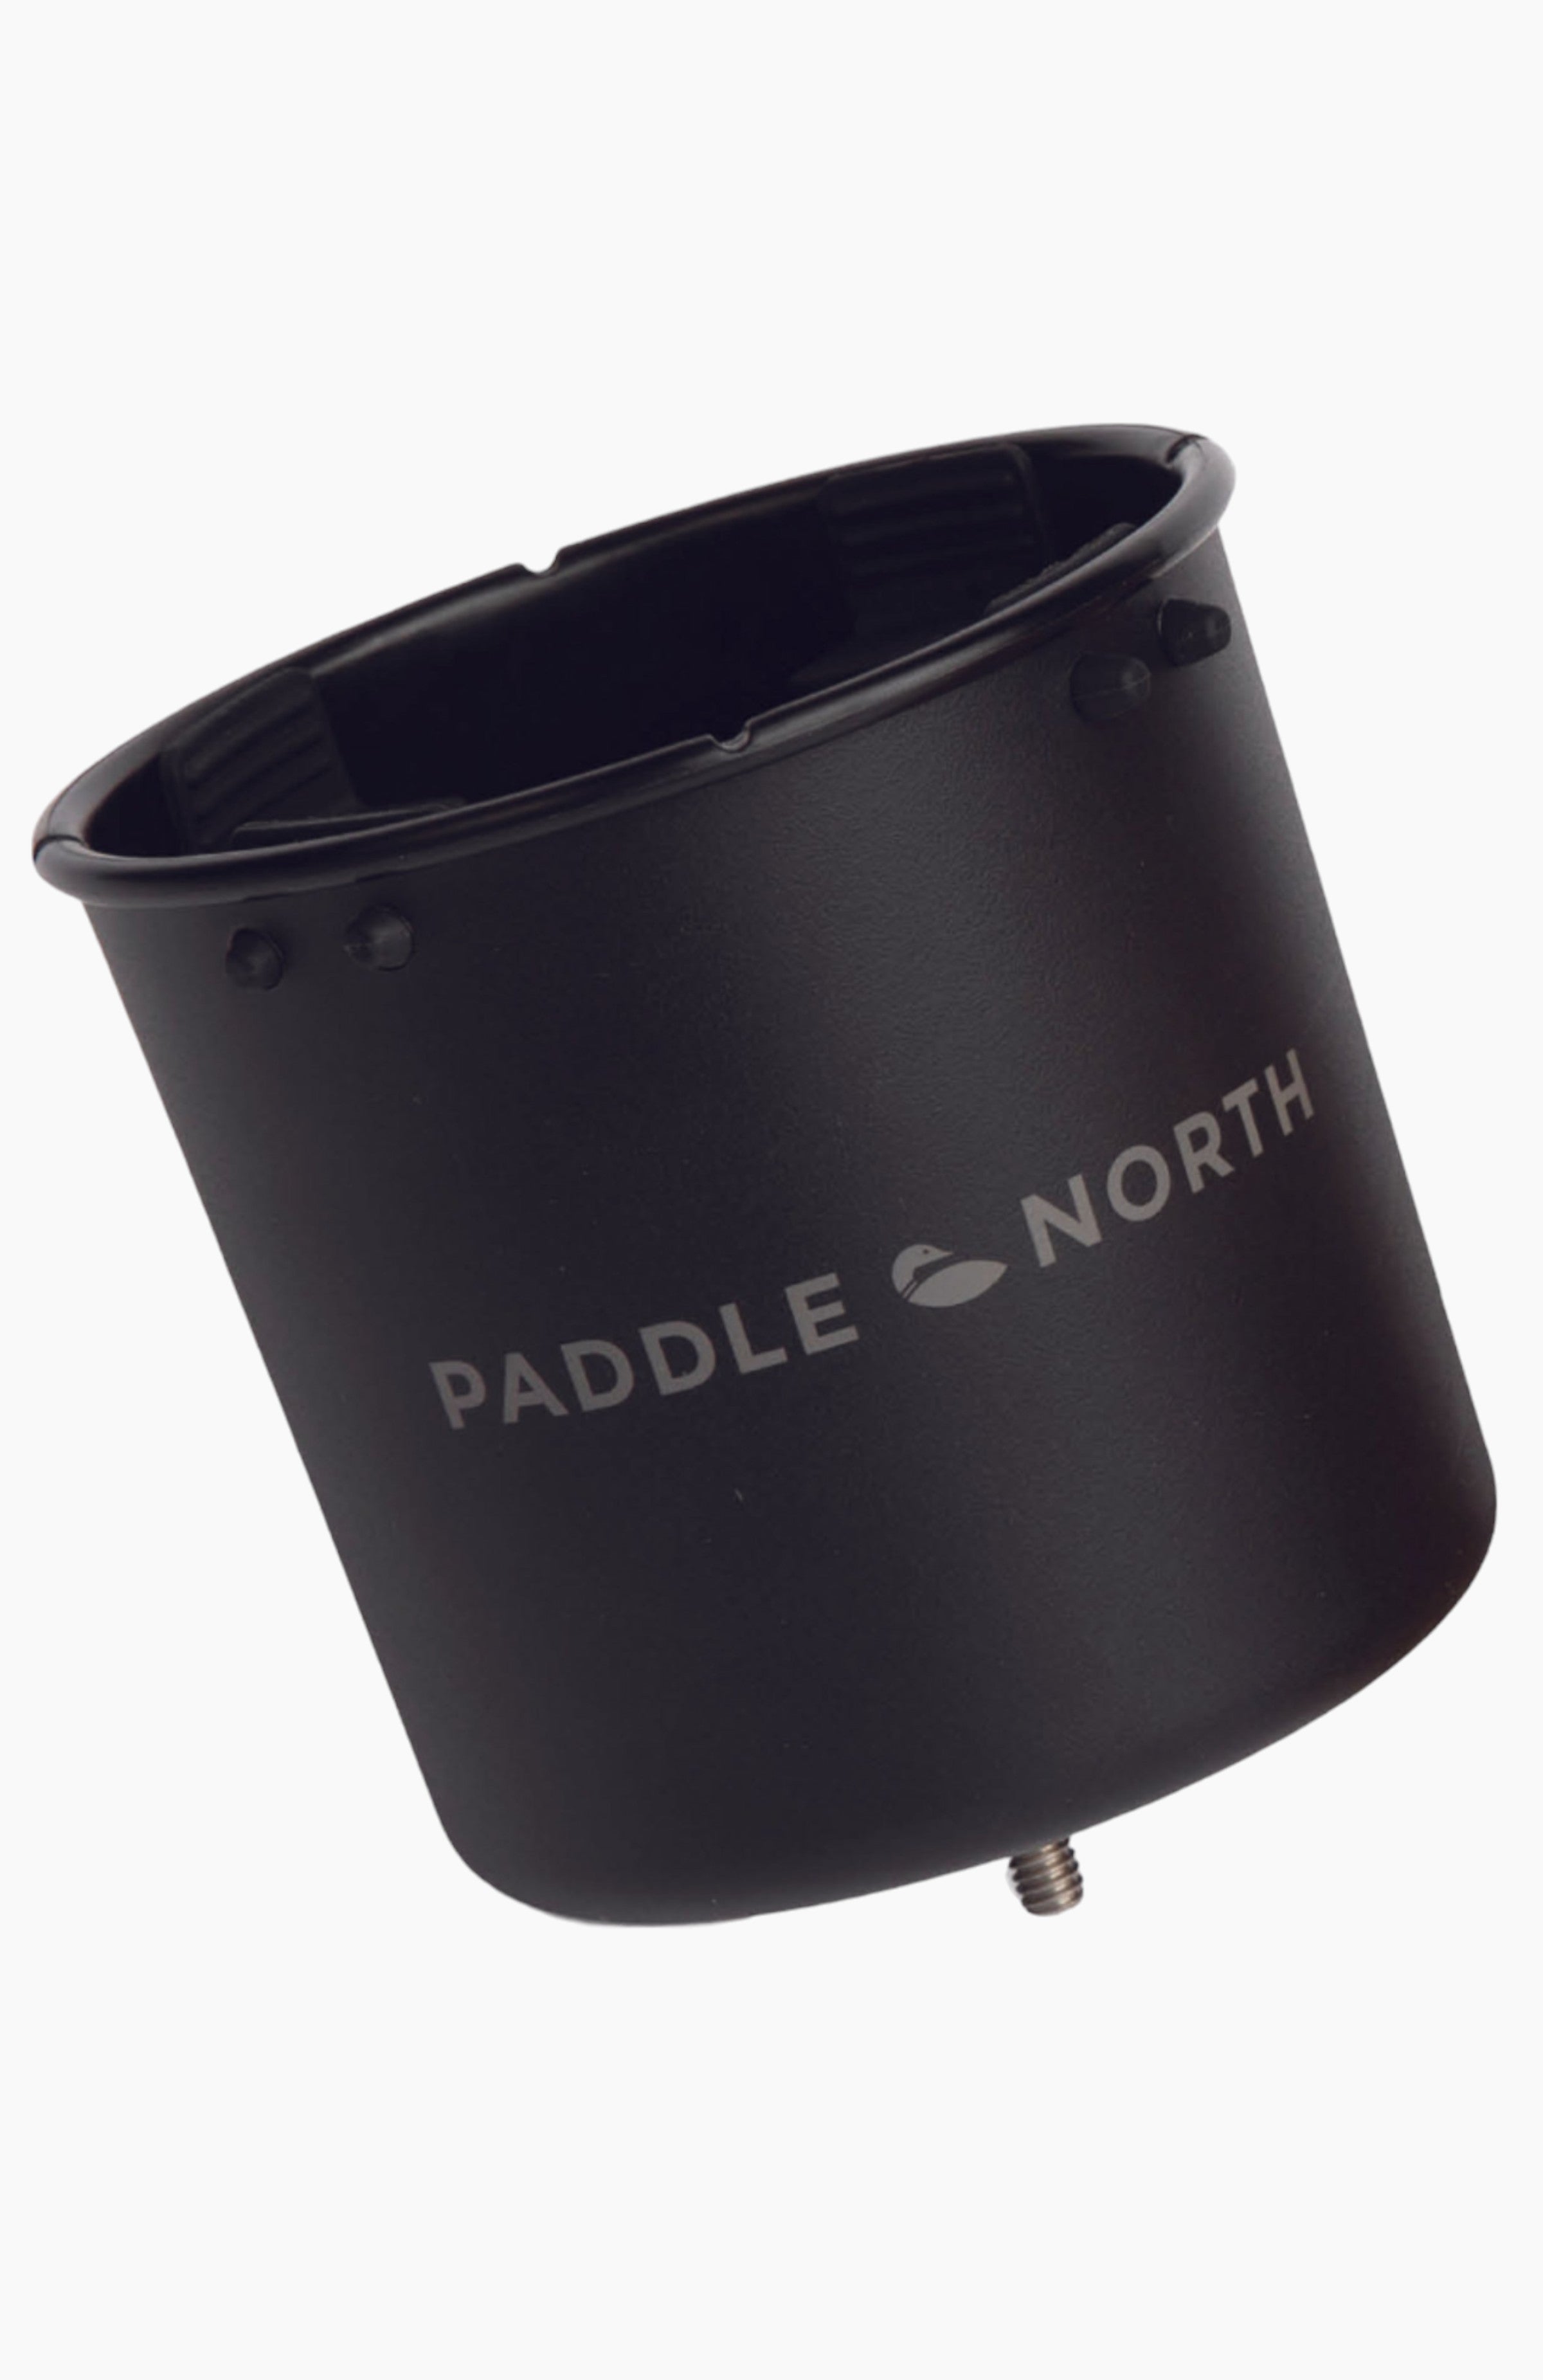 Paddle board accessories: black cup holder that screws into paddle north paddle boards and kayaks.